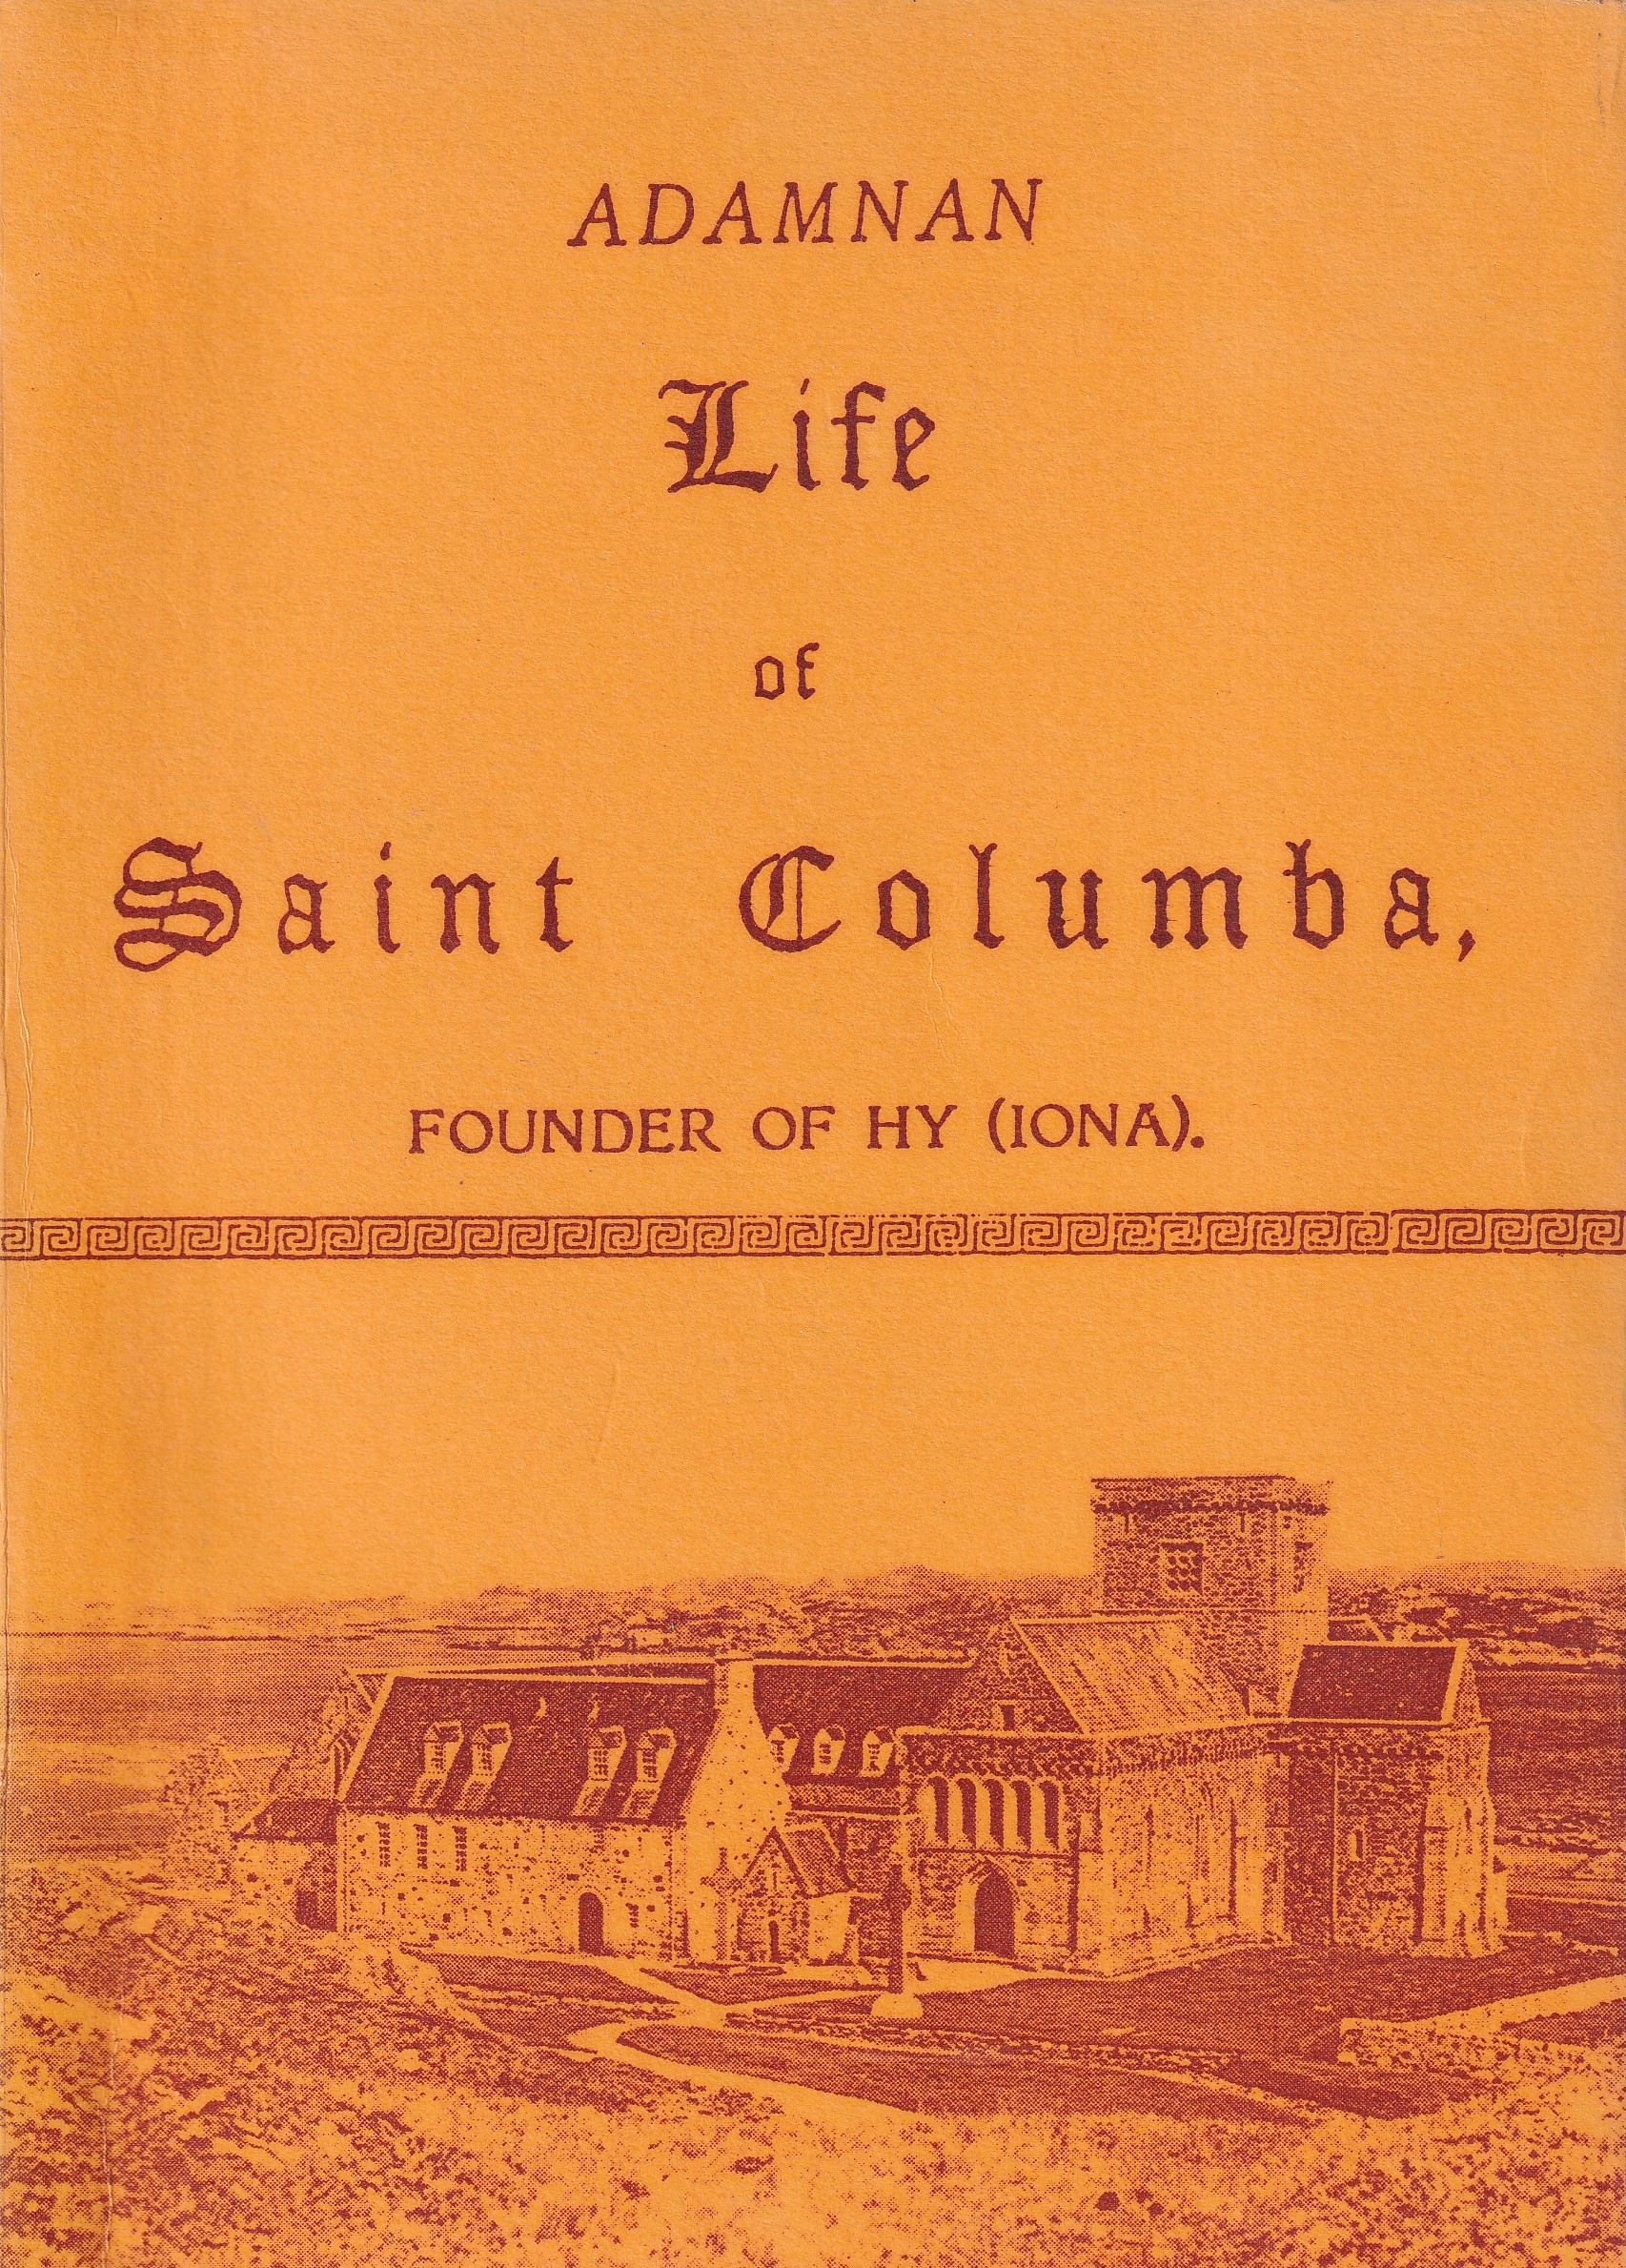 Life of saint Columba, Founder of HY | Adamnan | Charlie Byrne's